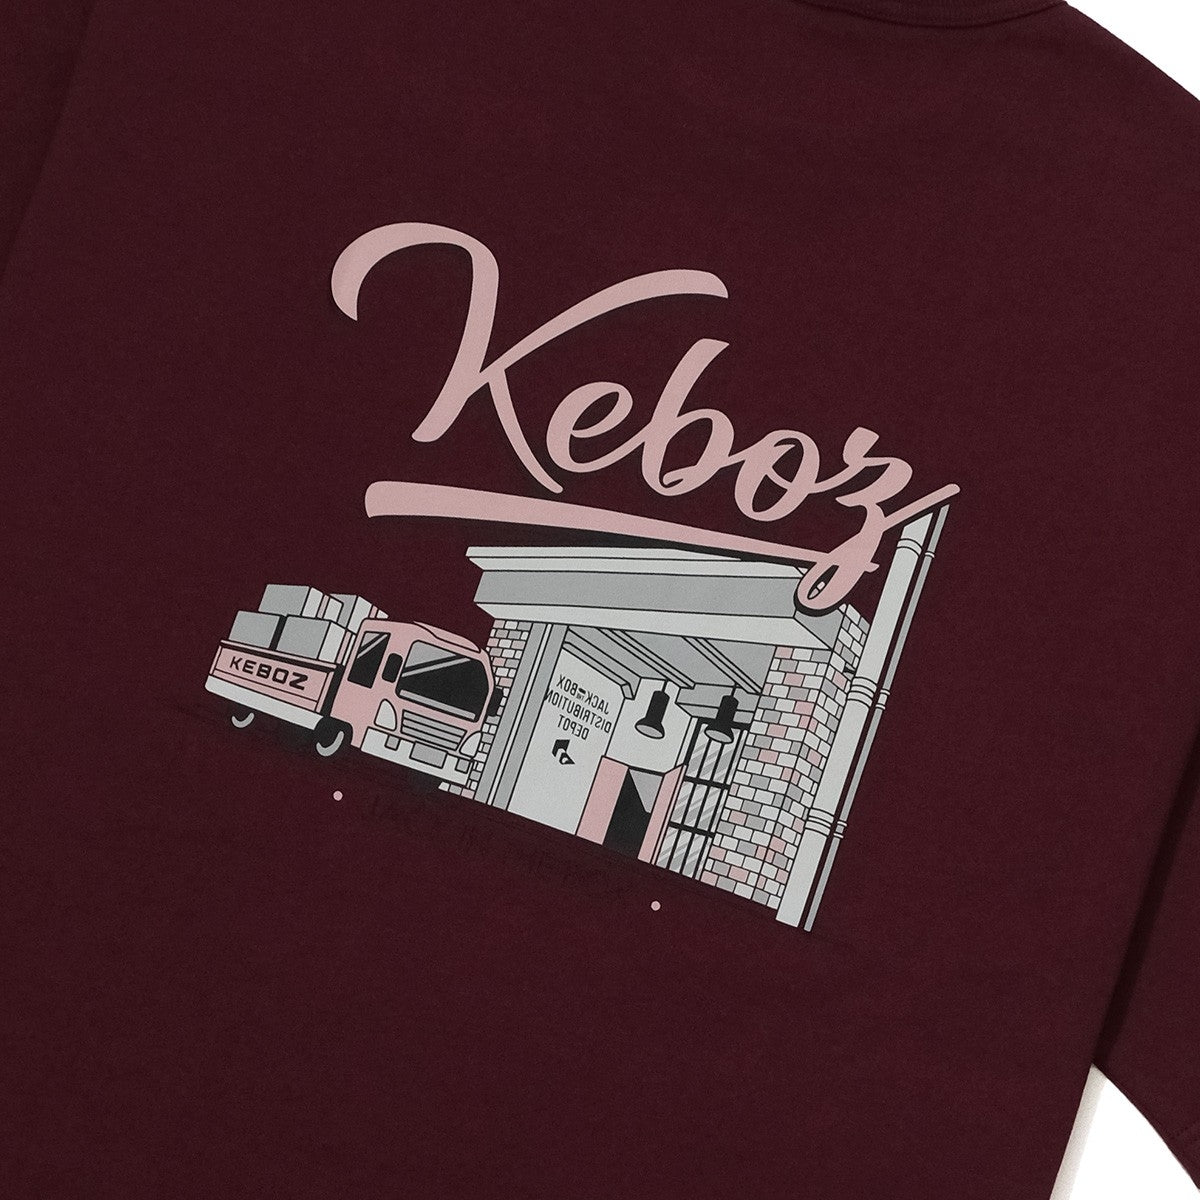 KEBOZ / JACK IN THE BOX 12 YEAR ANNIVERSARY S/S TEE